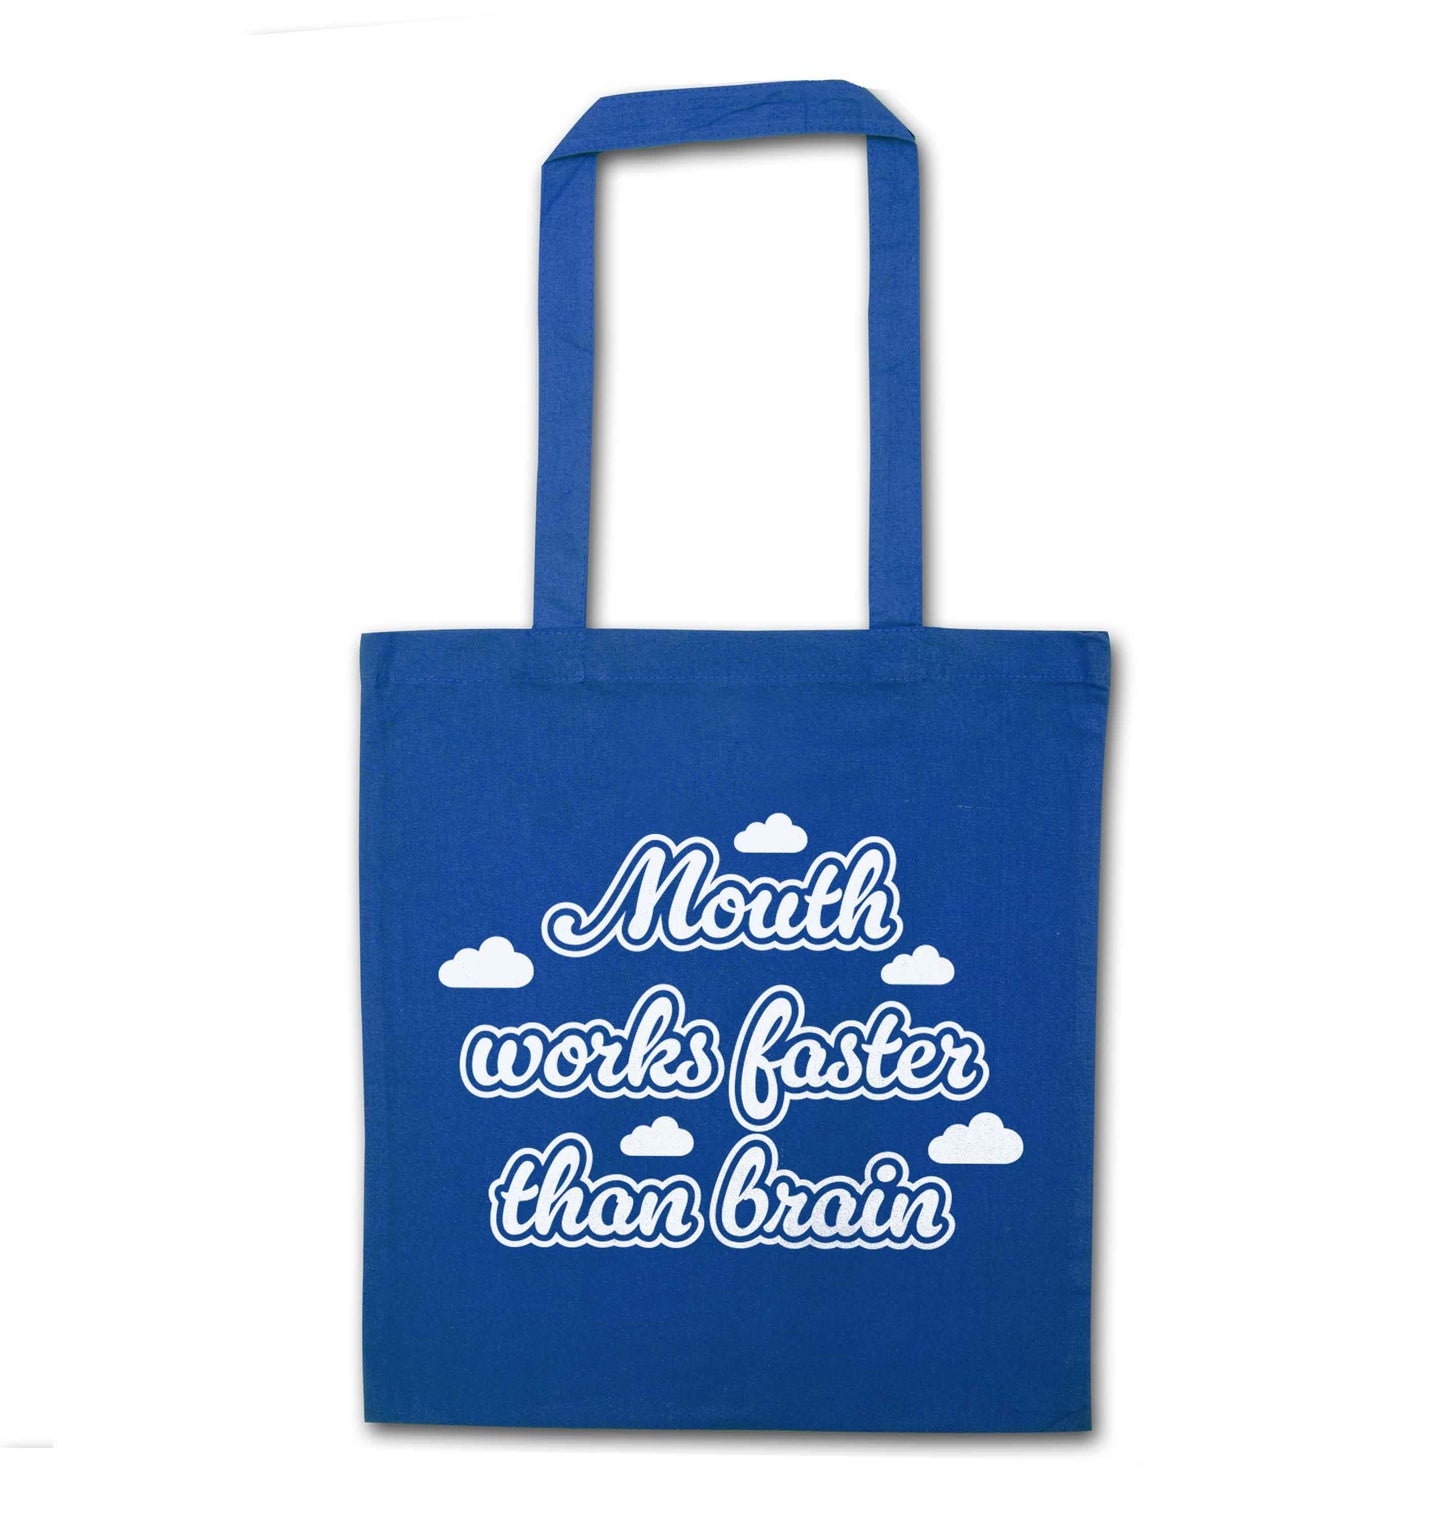 Mouth works faster than brain blue tote bag